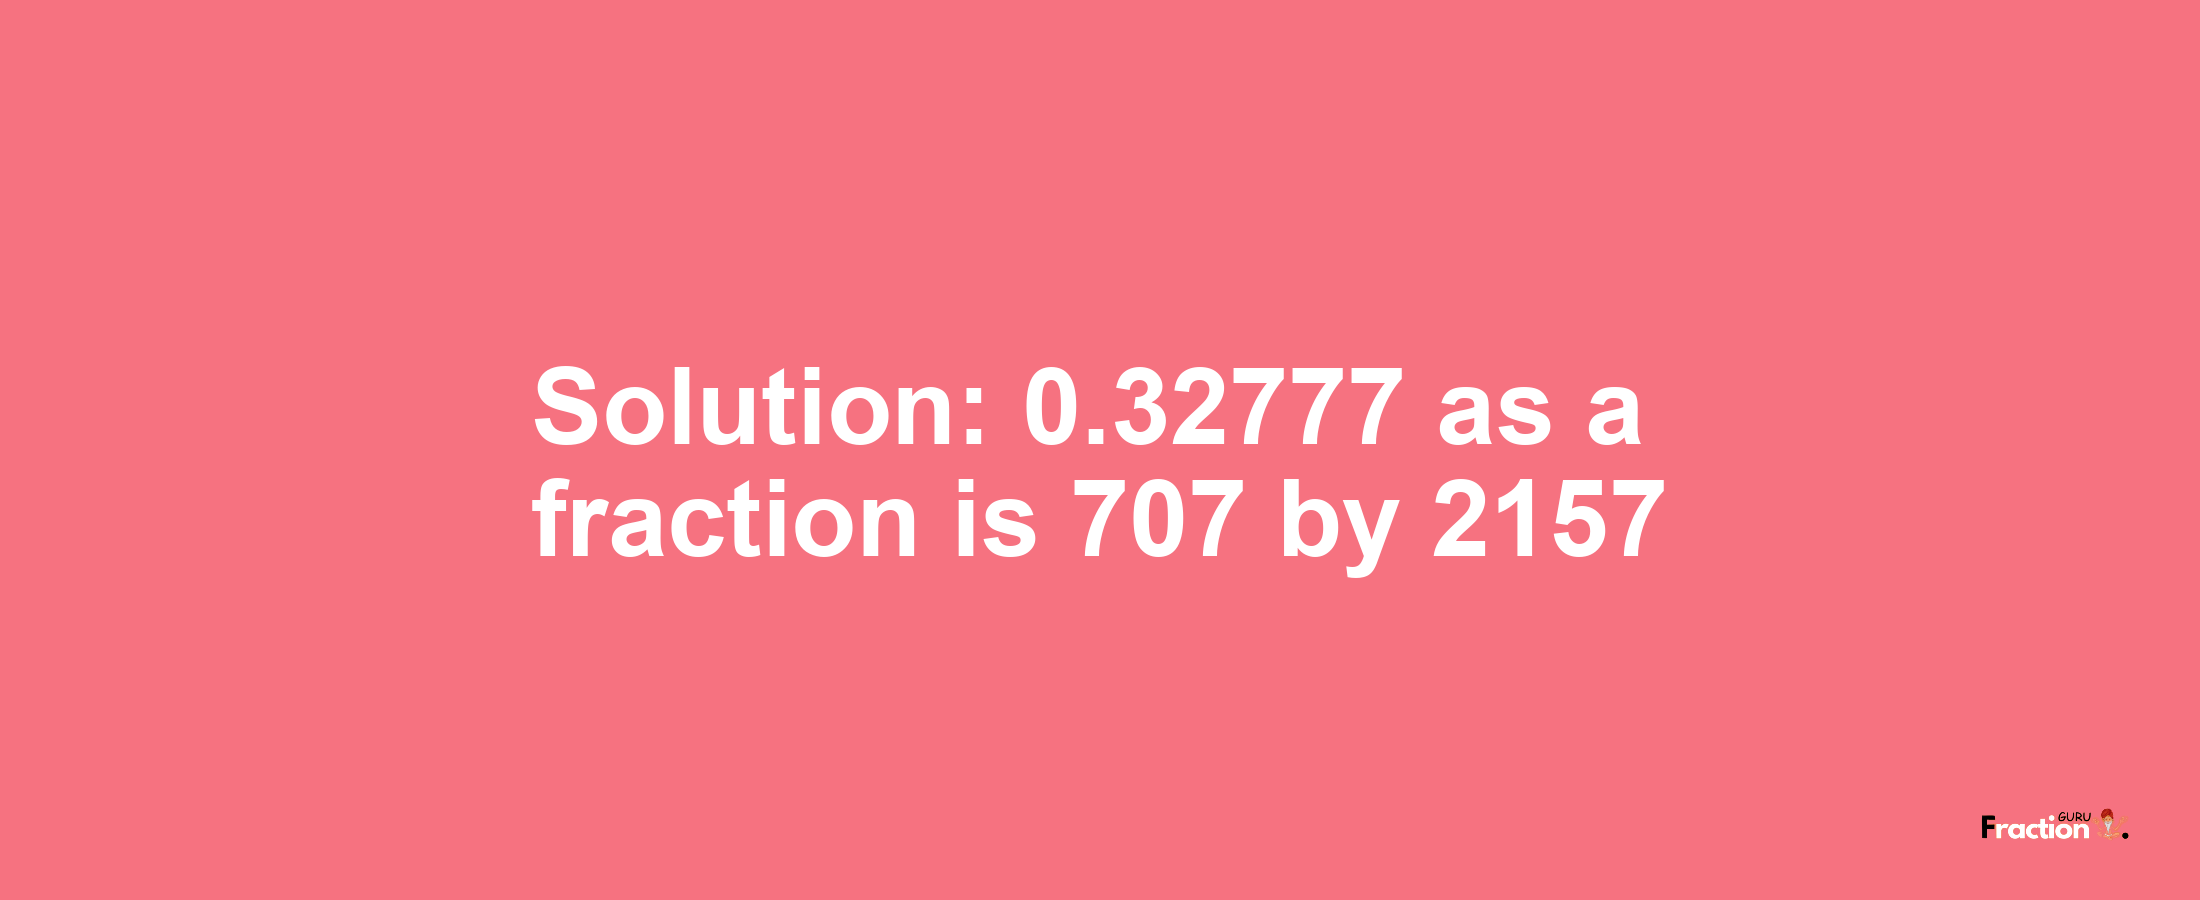 Solution:0.32777 as a fraction is 707/2157